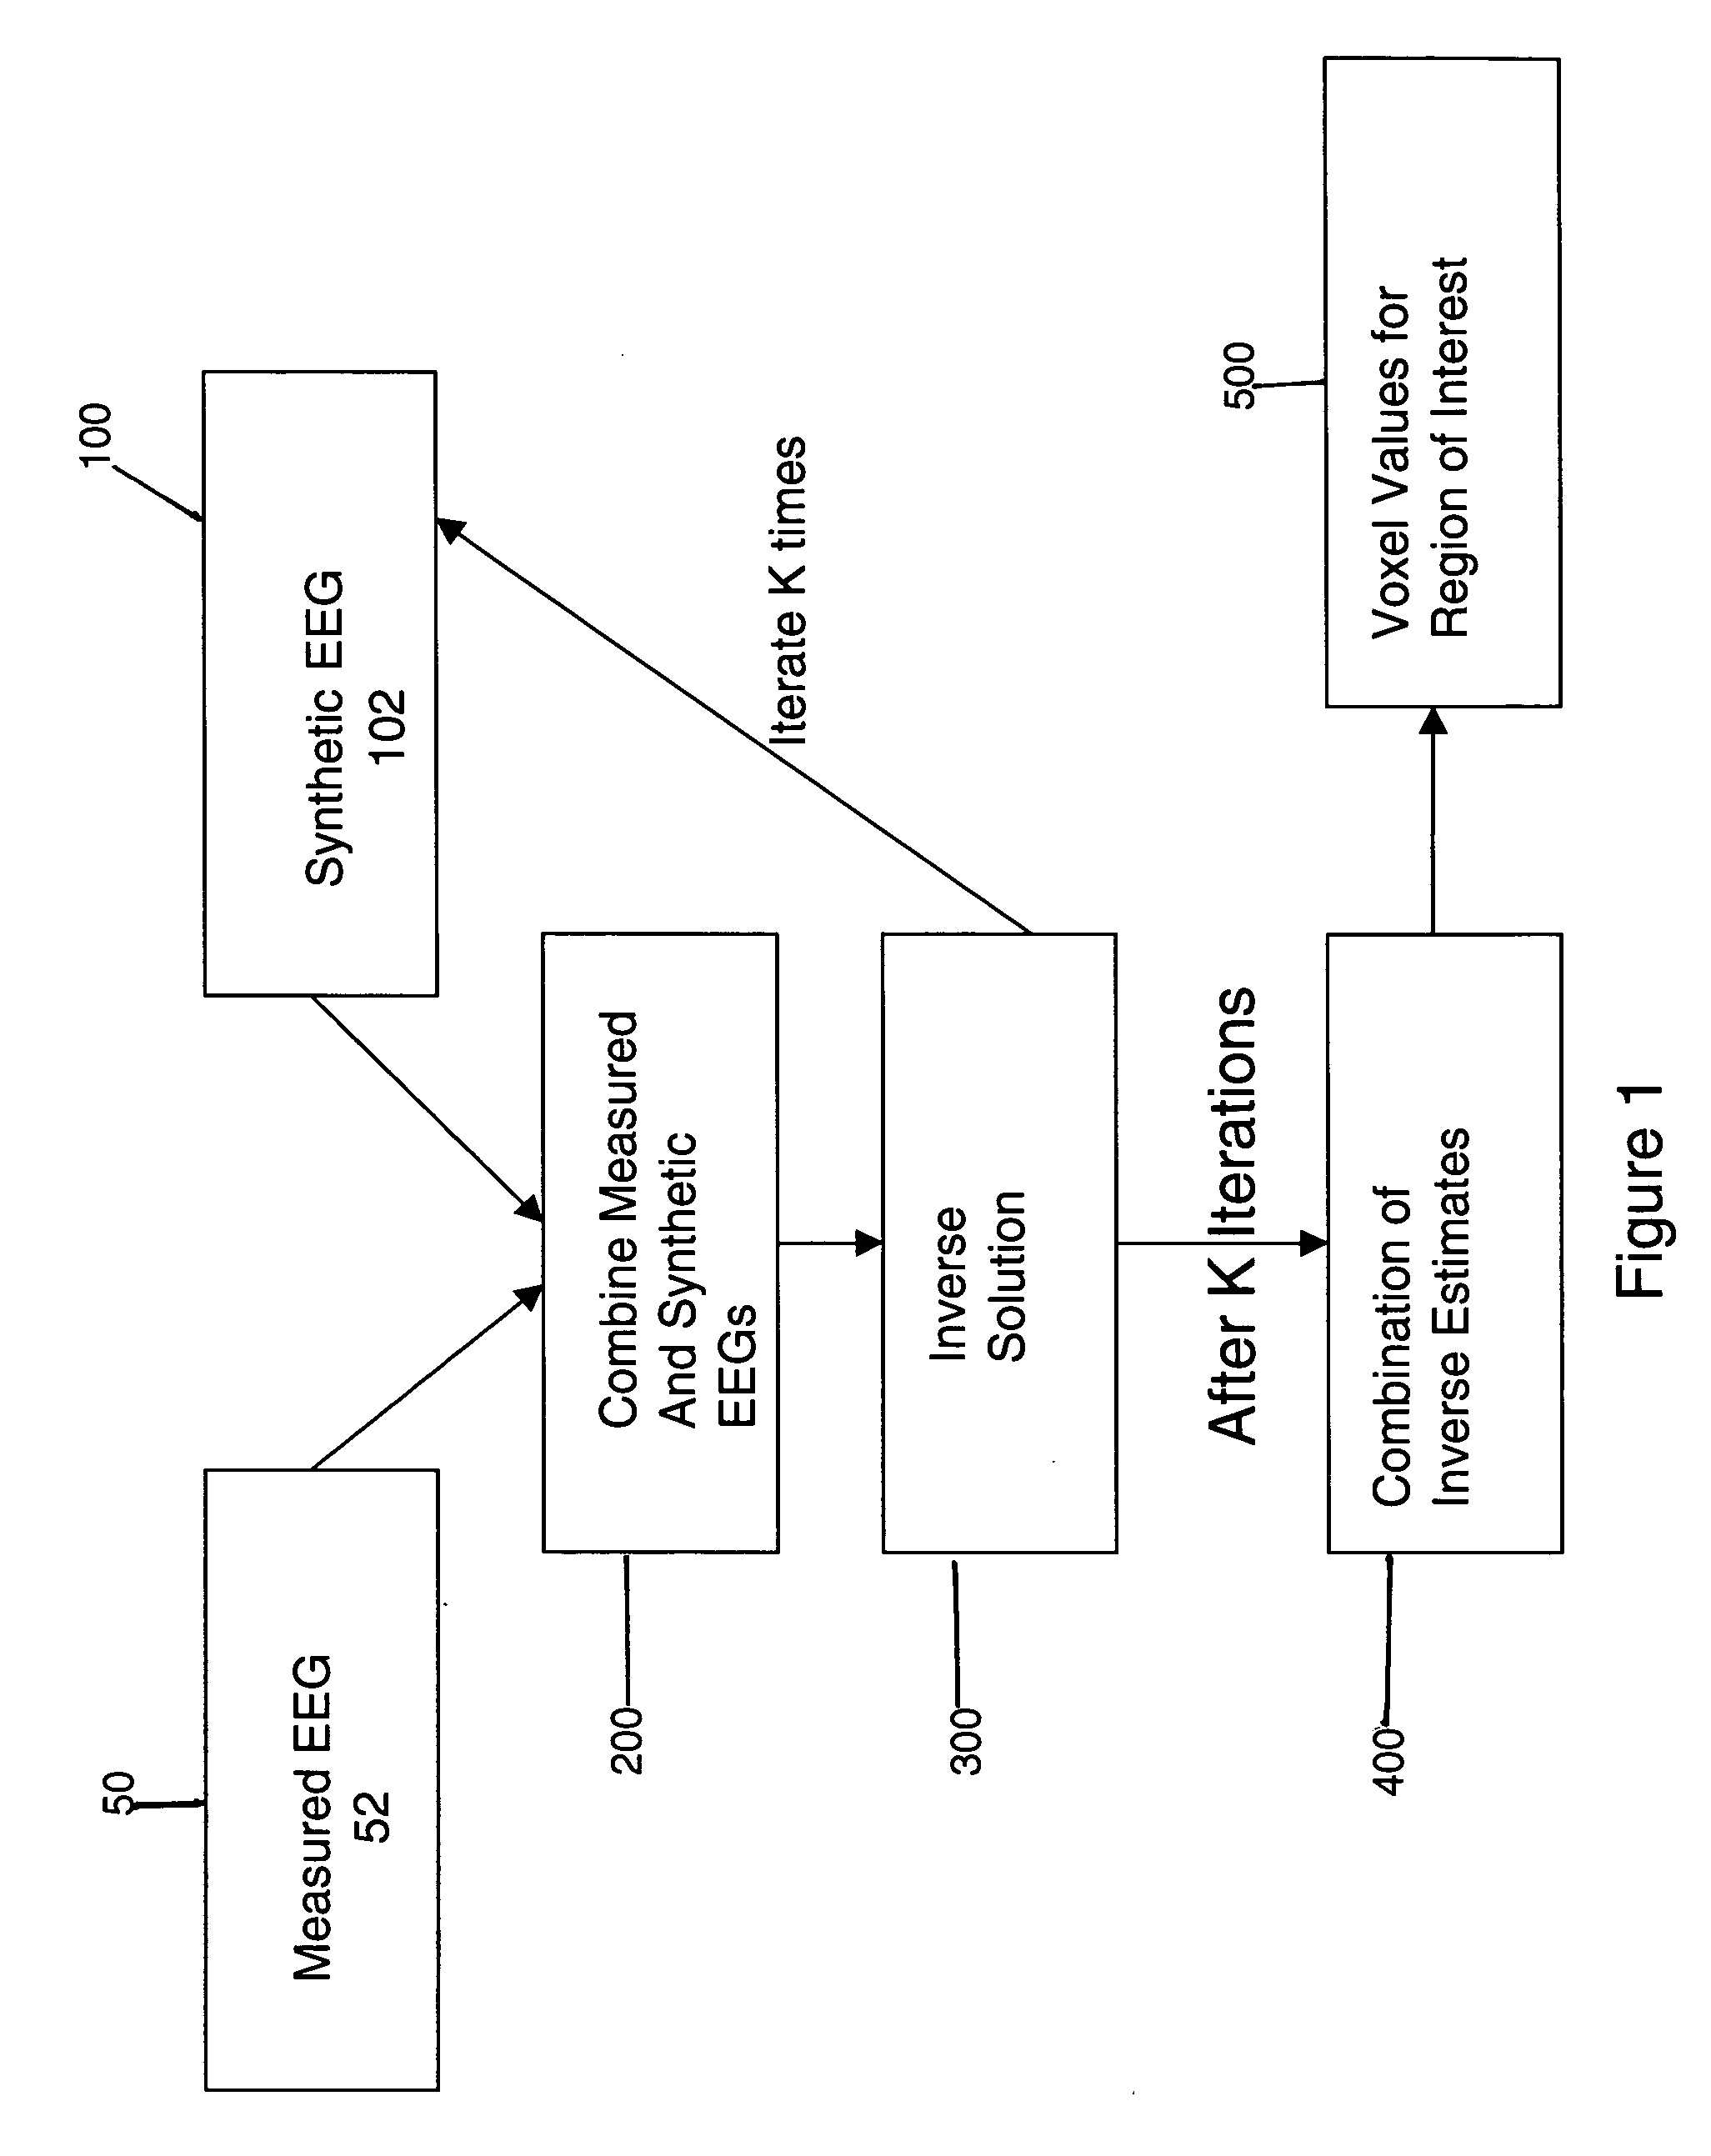 System and method for EEG imaging of cerebral activity using small electrode sets